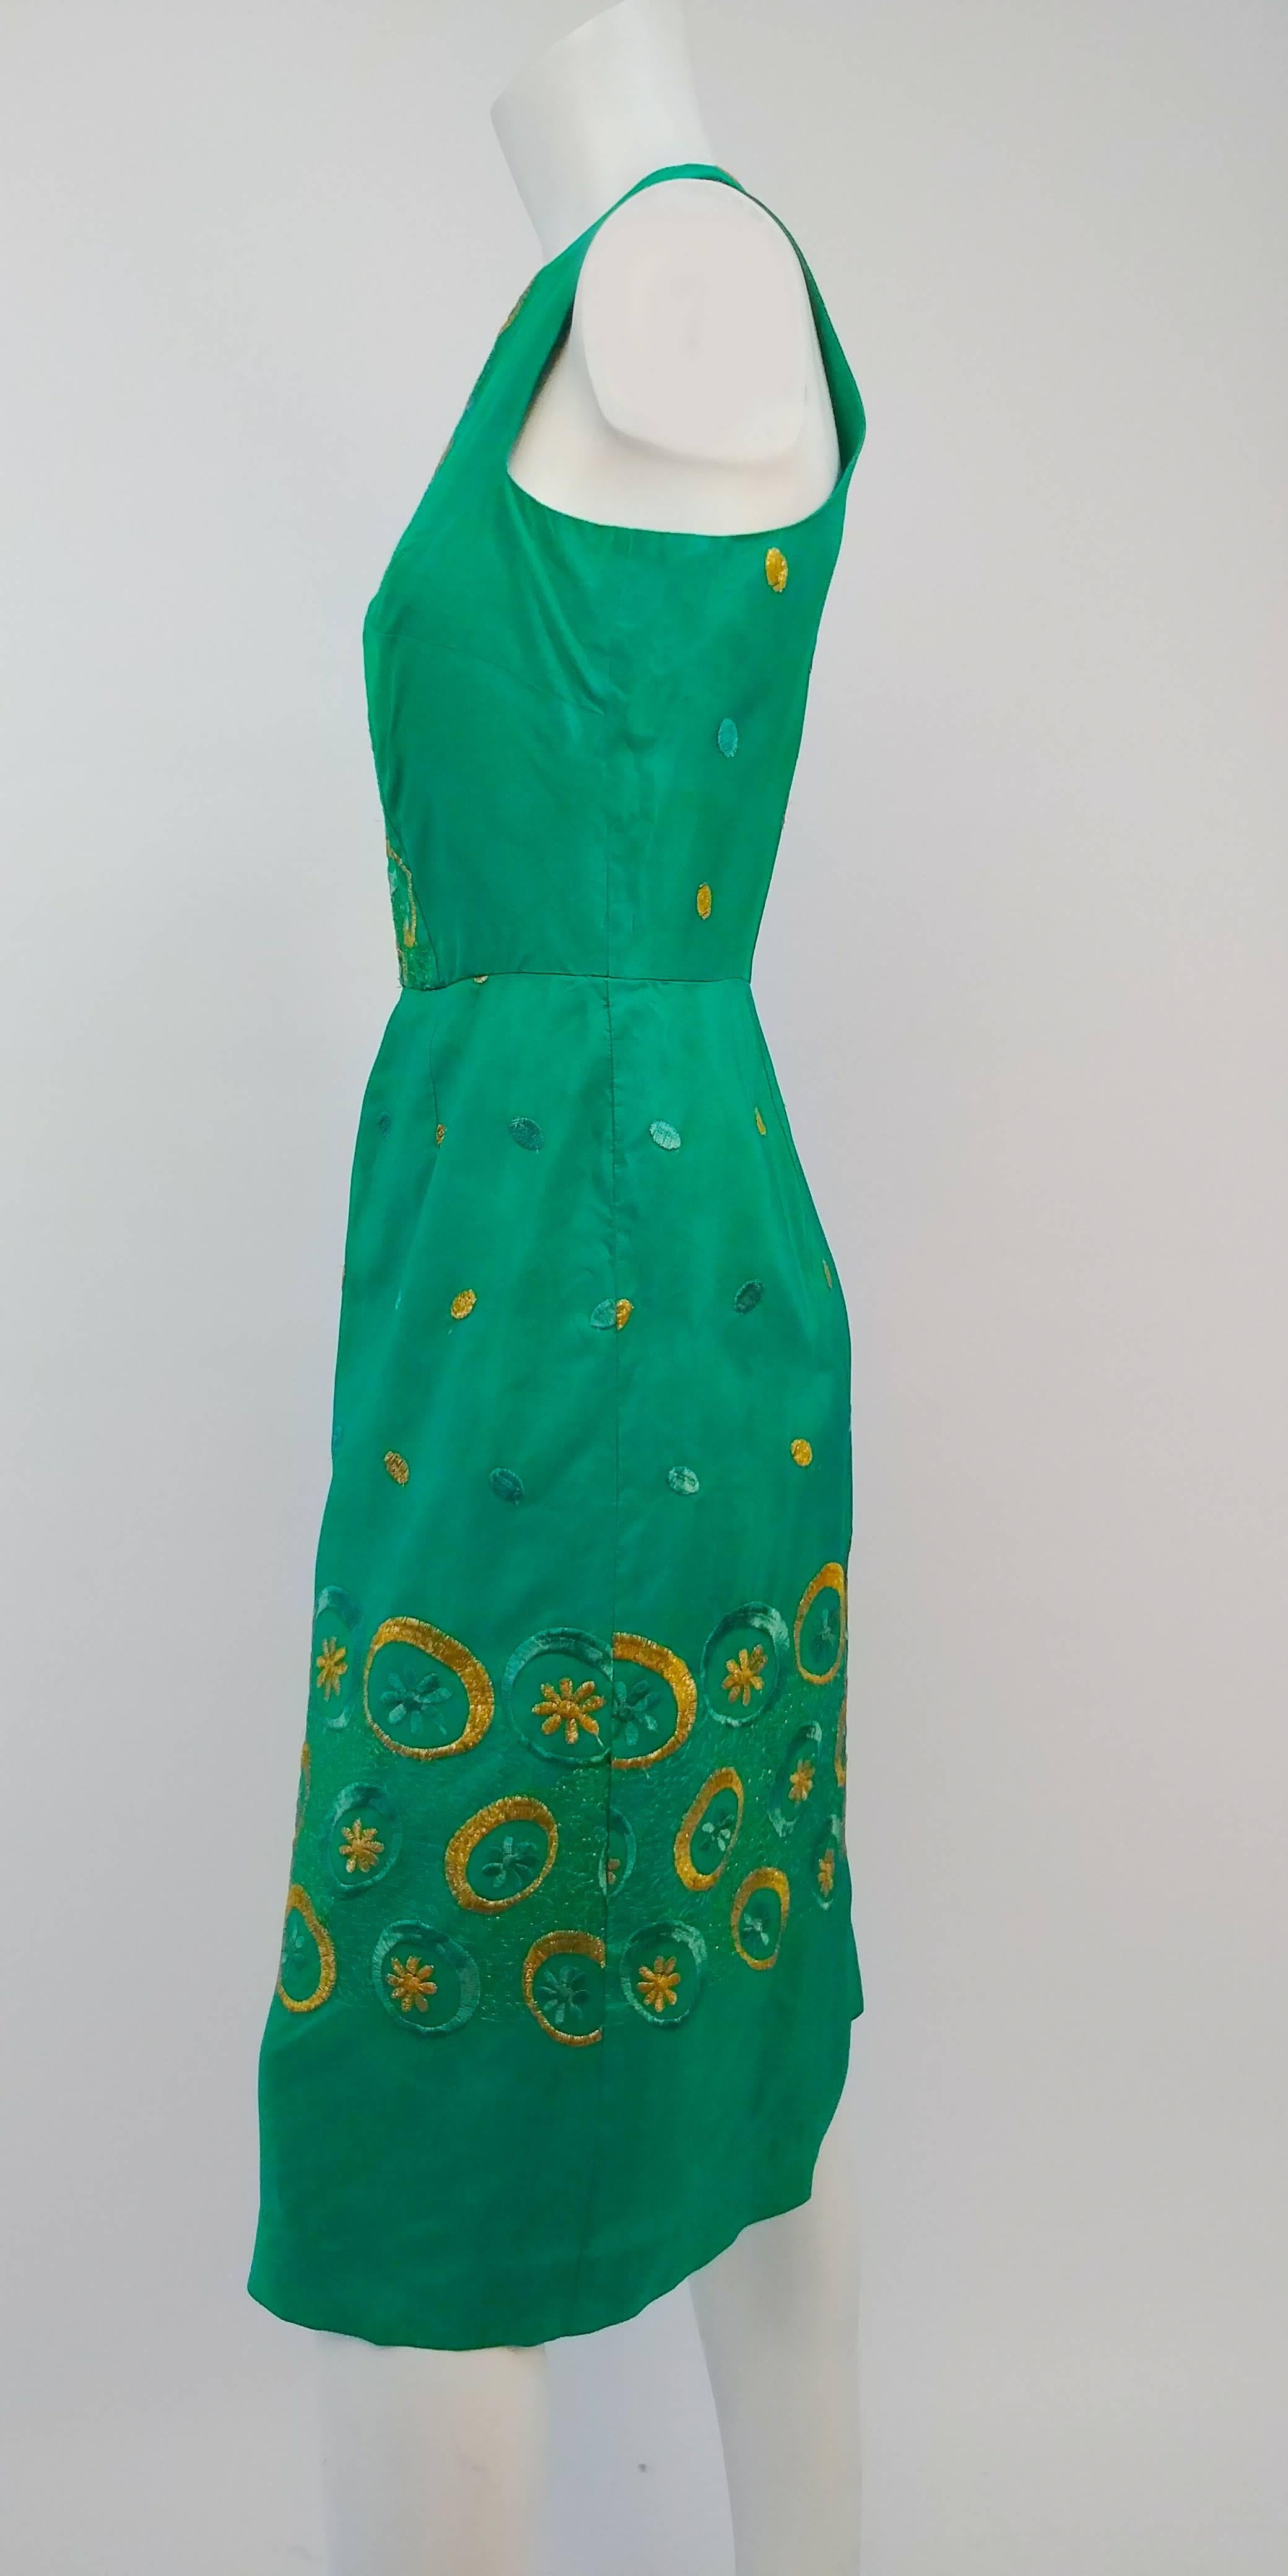 1960s Emerald Green Embroidered Cocktail Dress.

This dress is about a size 12 to 14. The measurements are as follows:

Bust: up to 42